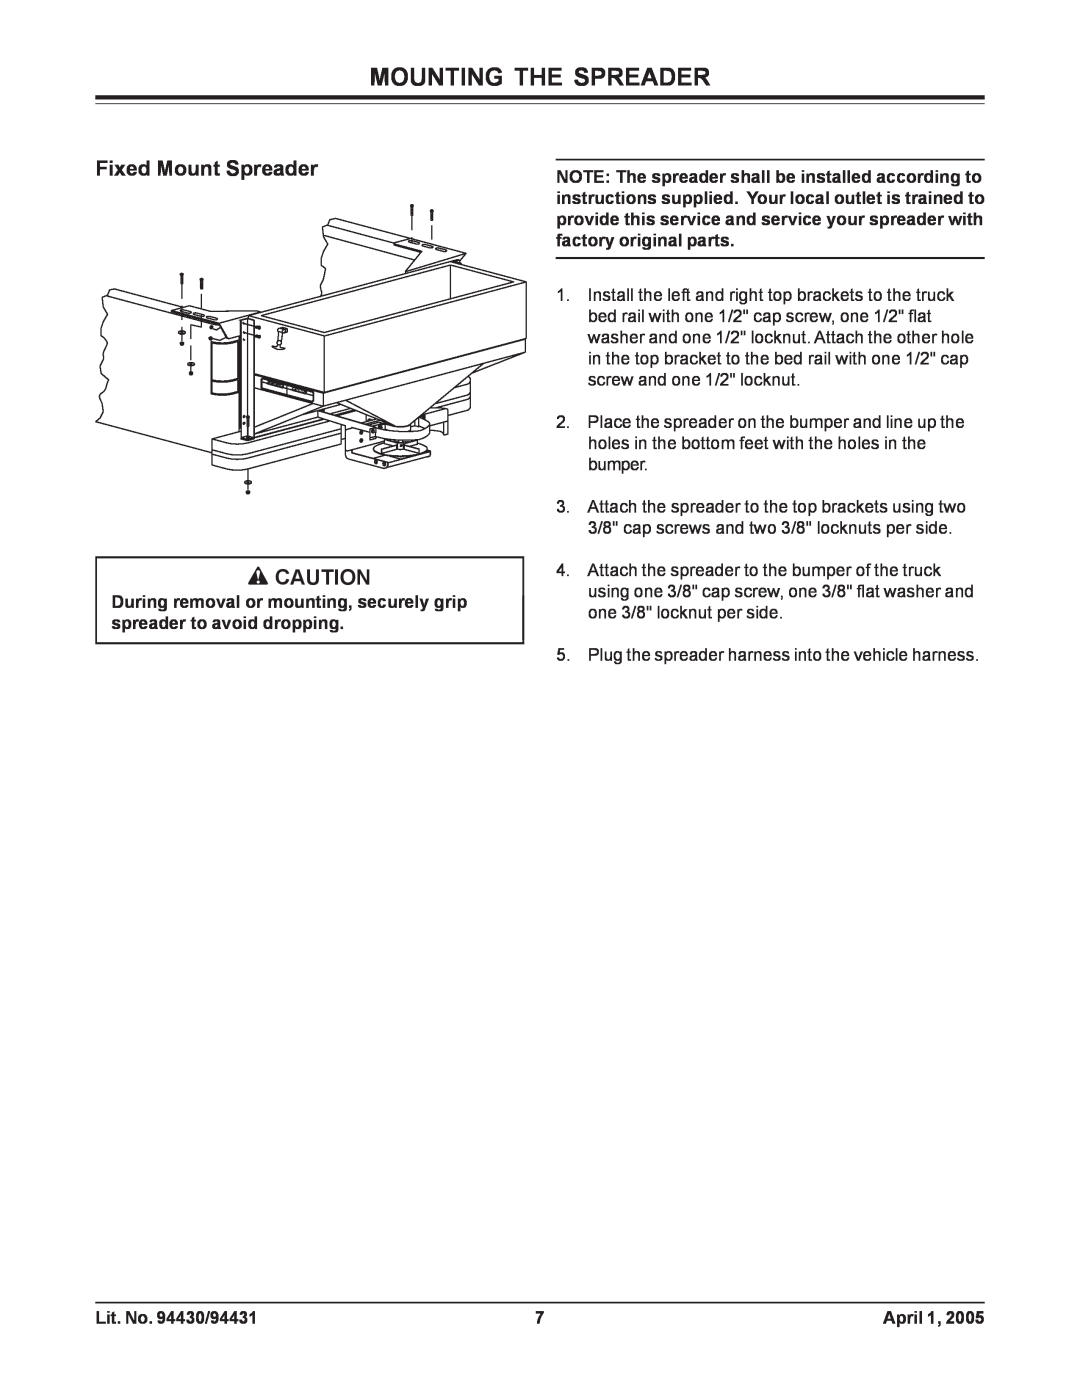 Fisher 2000-(20364), 1000-(10003) owner manual Mounting The Spreader, Fixed Mount Spreader 